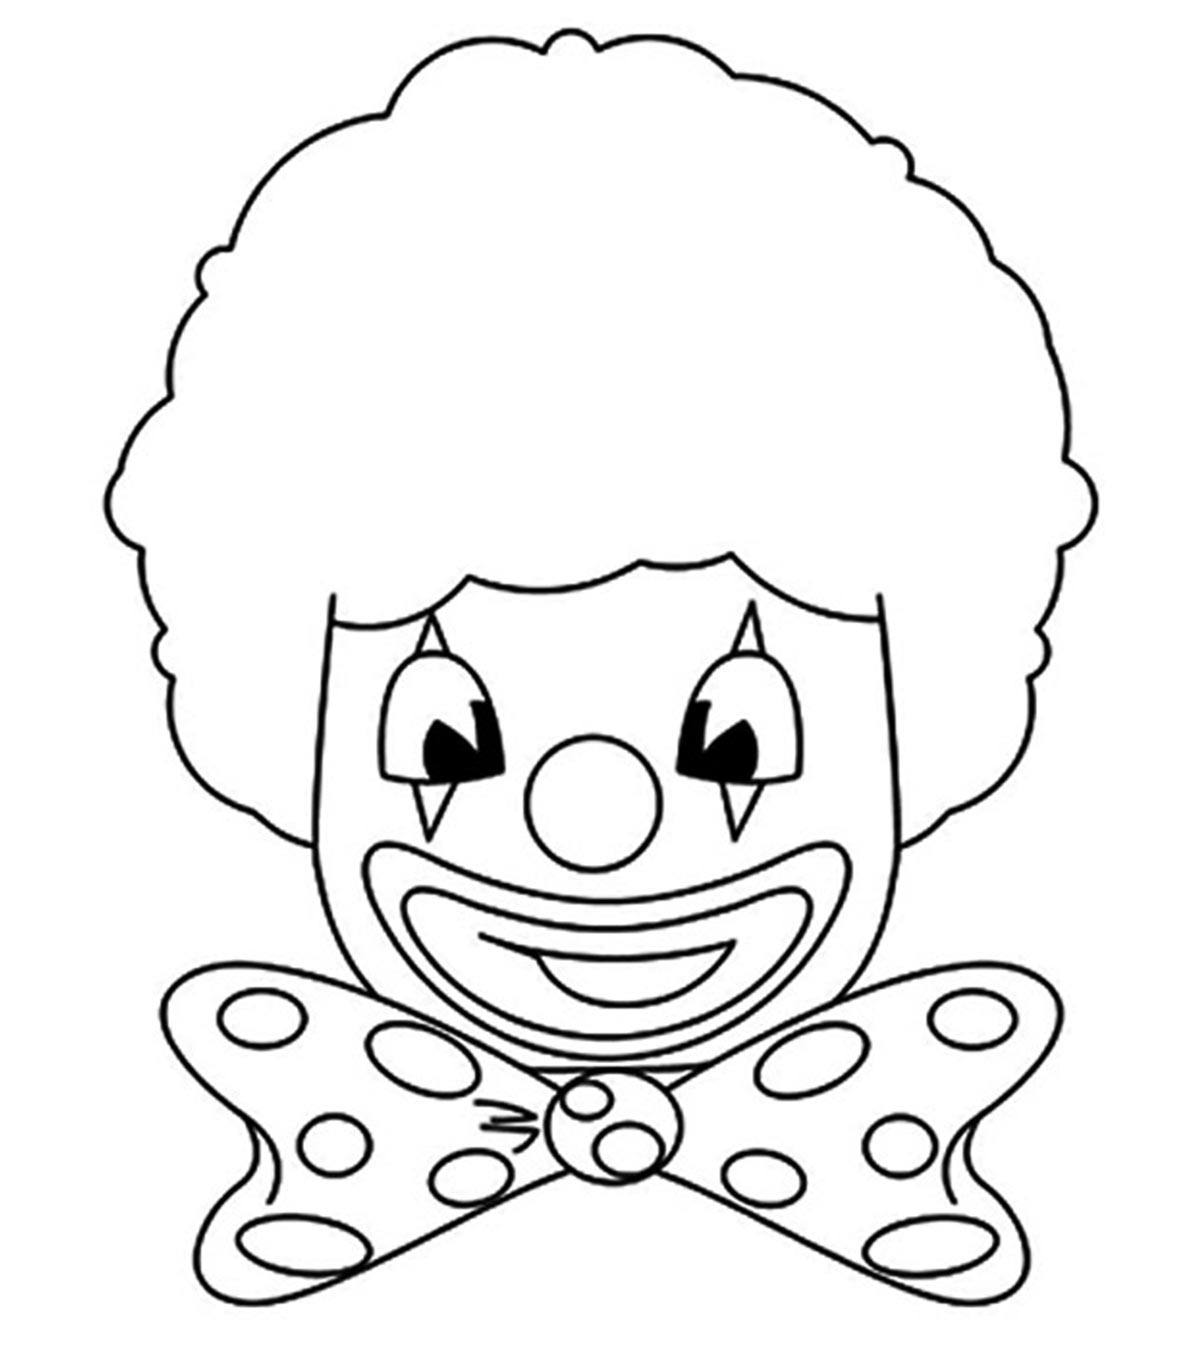 People Coloring Pages - Momjunction